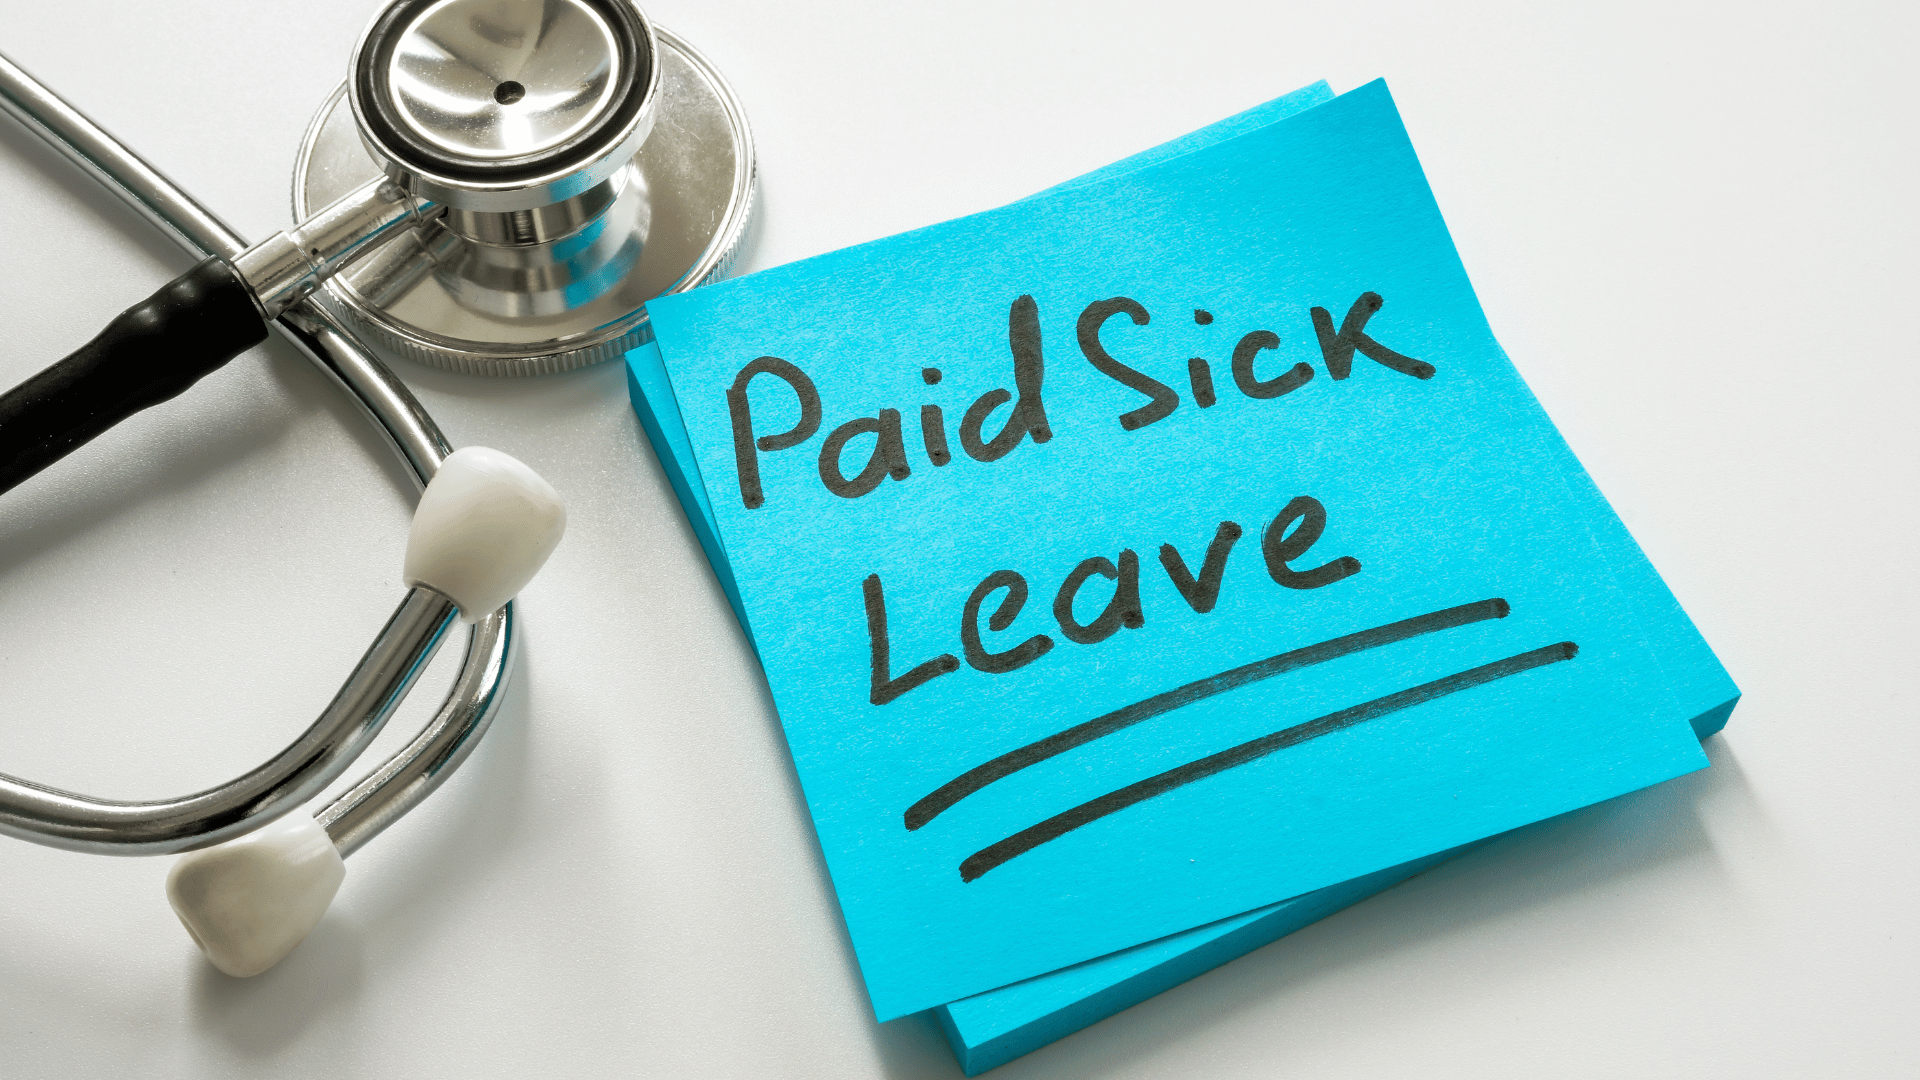 New York City Companies: Be Prepared for a Change to Sick Leave Laws